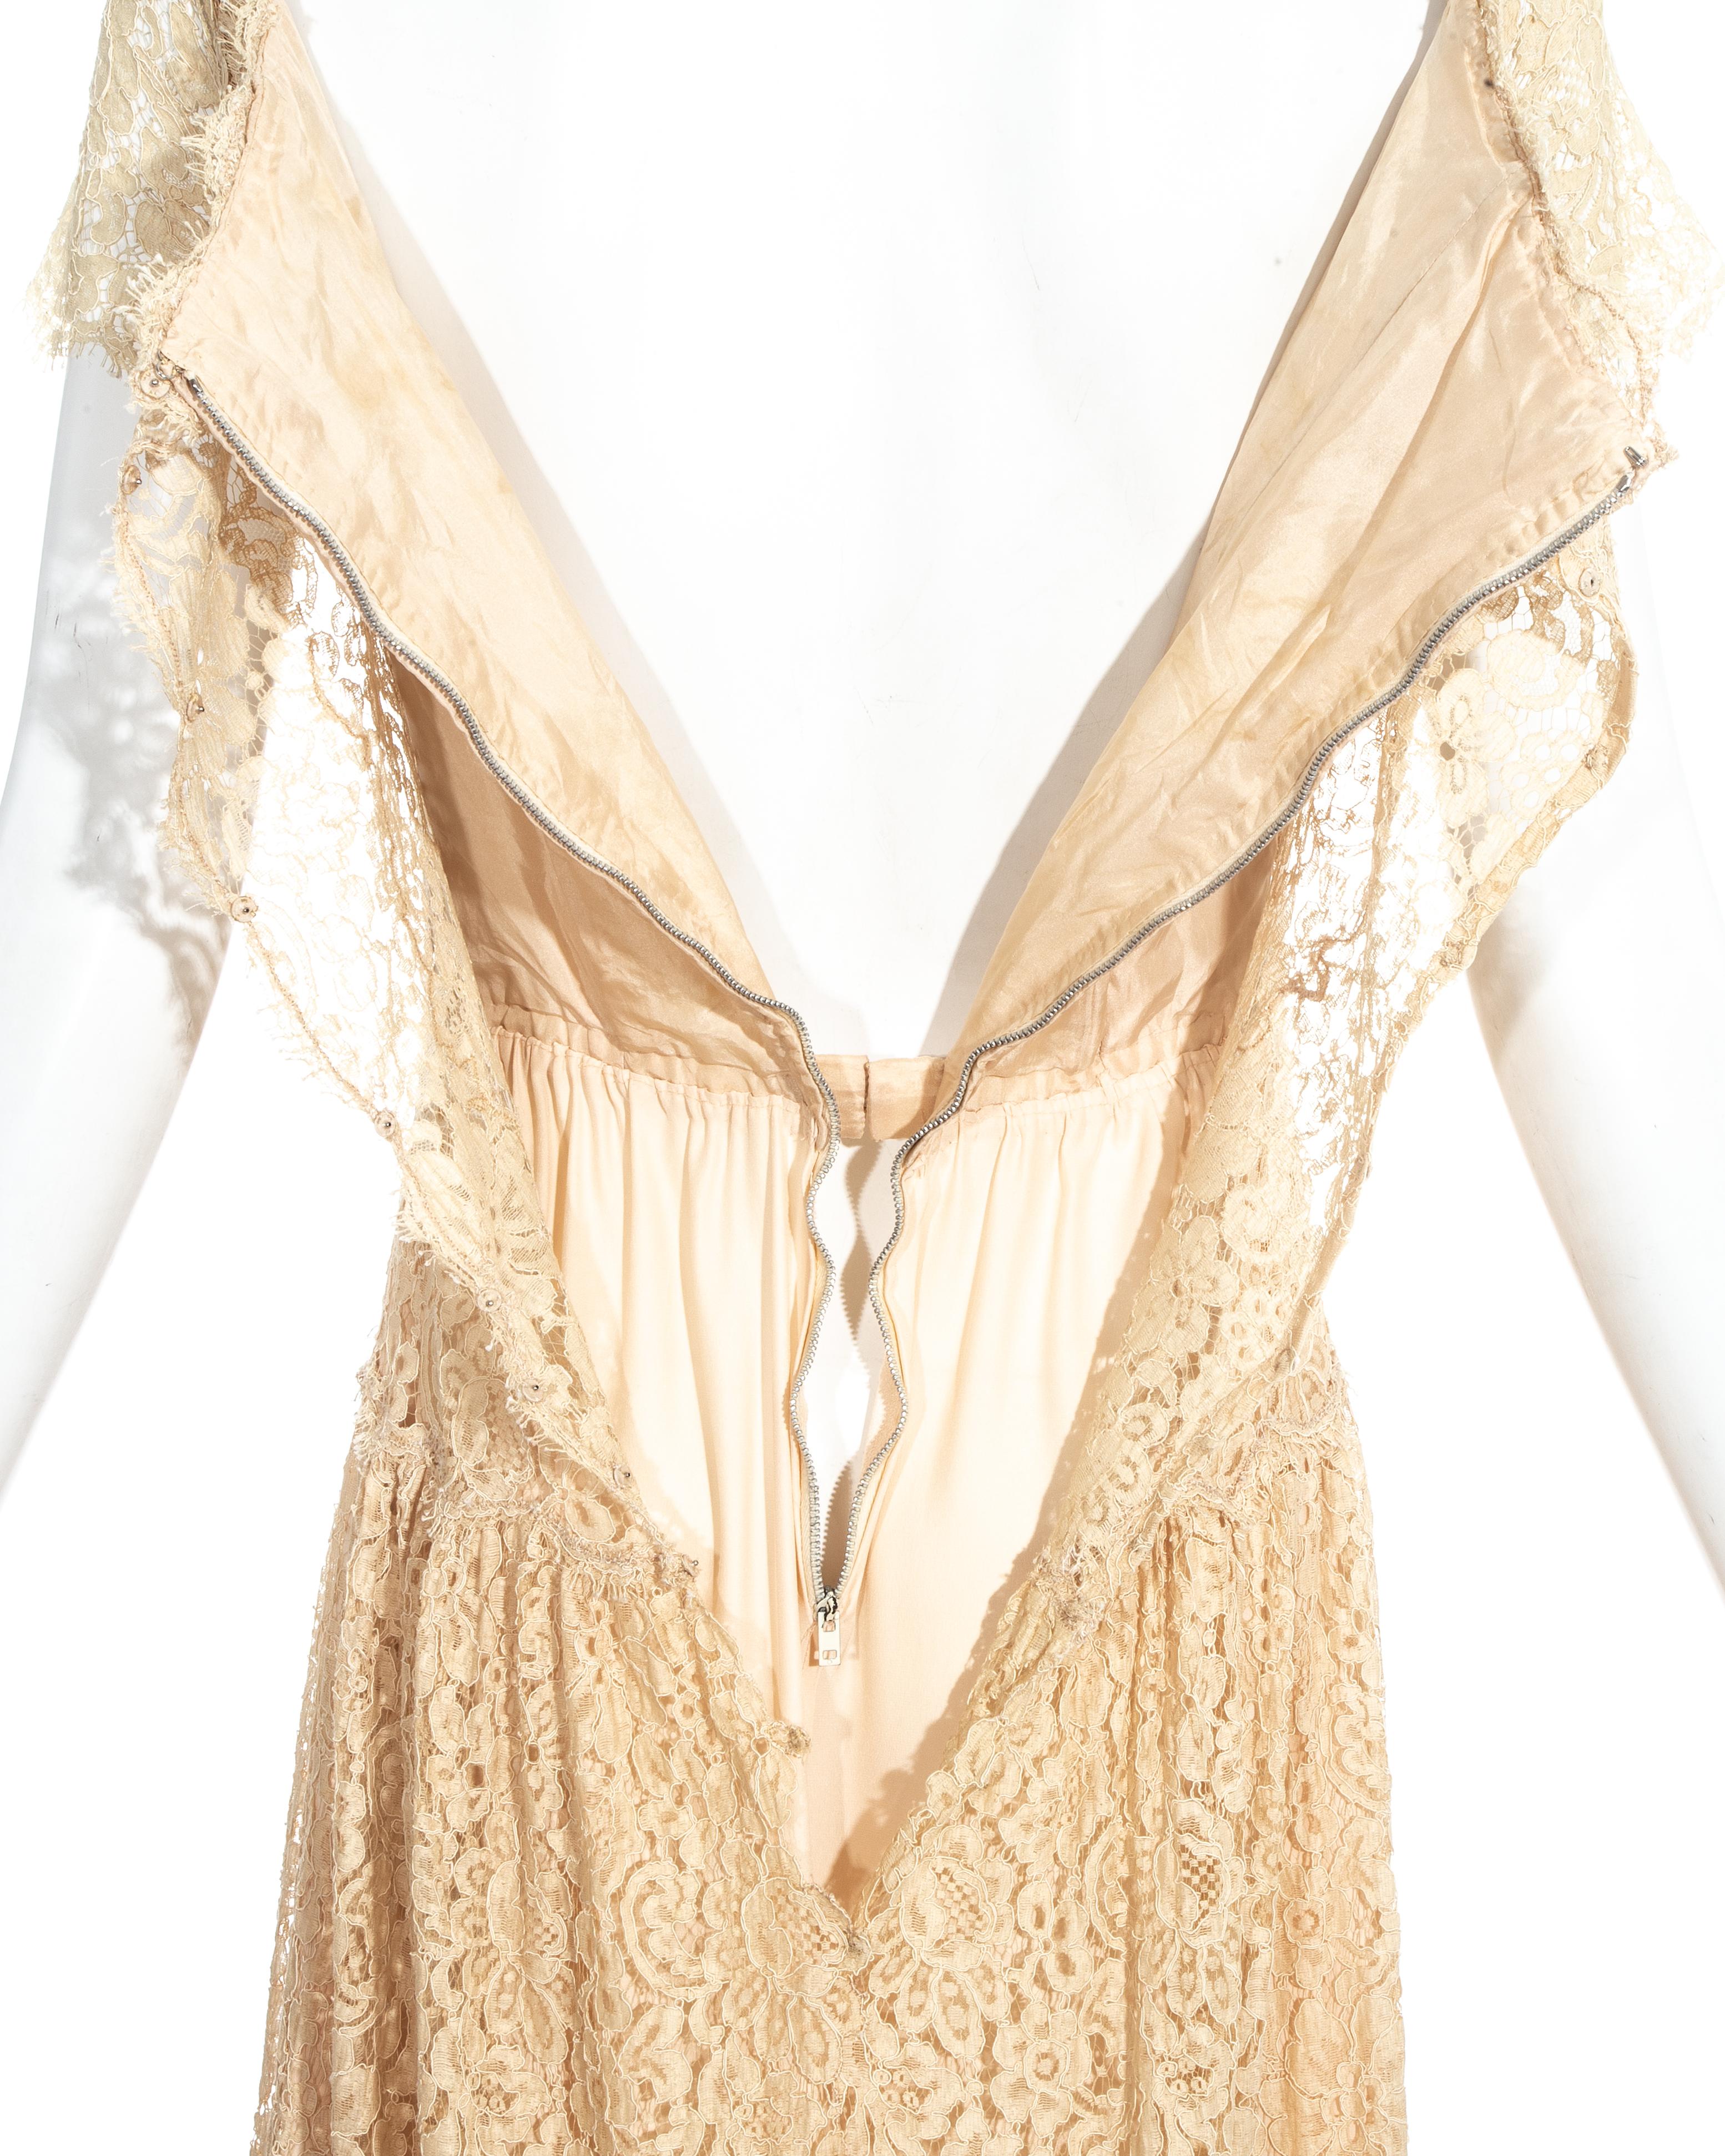 Women's Chanel Haute Couture ivory lace wedding dress, c. 1960s For Sale